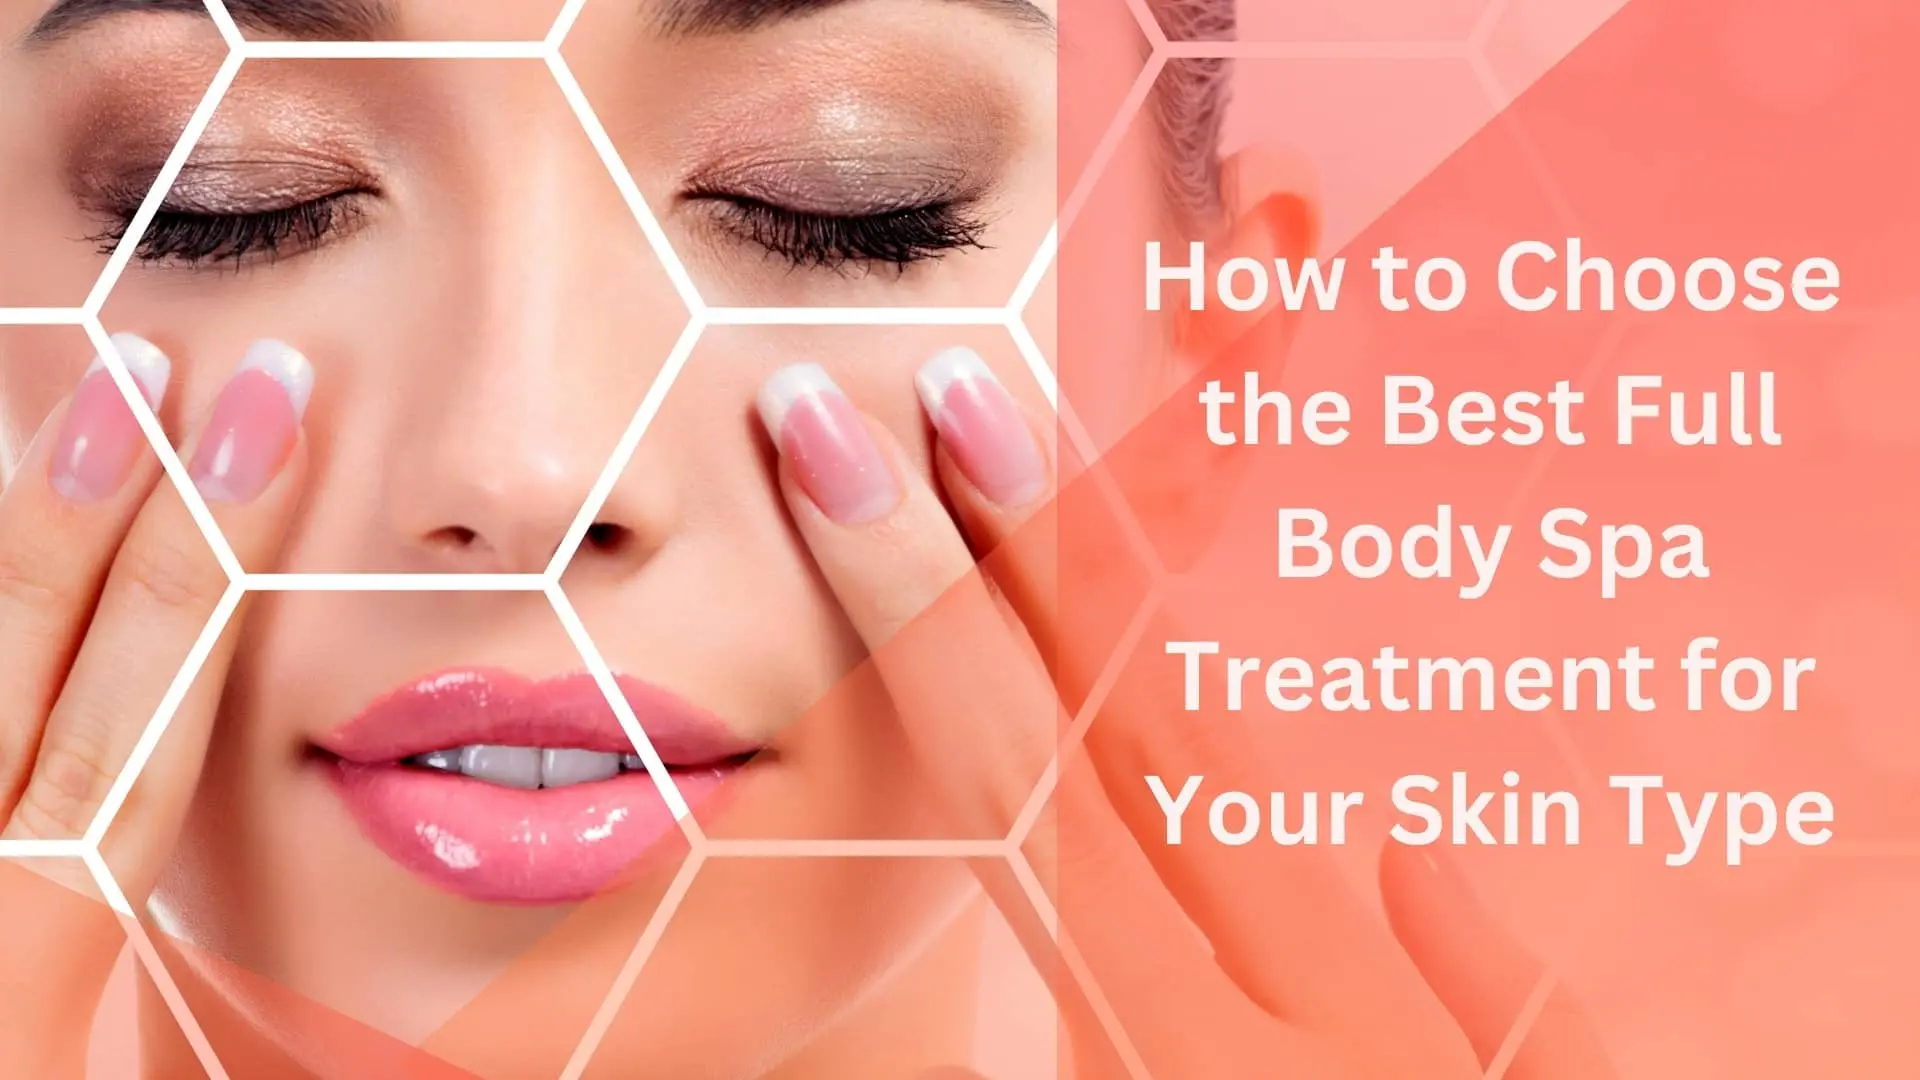 Full Body Spa Treatment for Your Skin Type